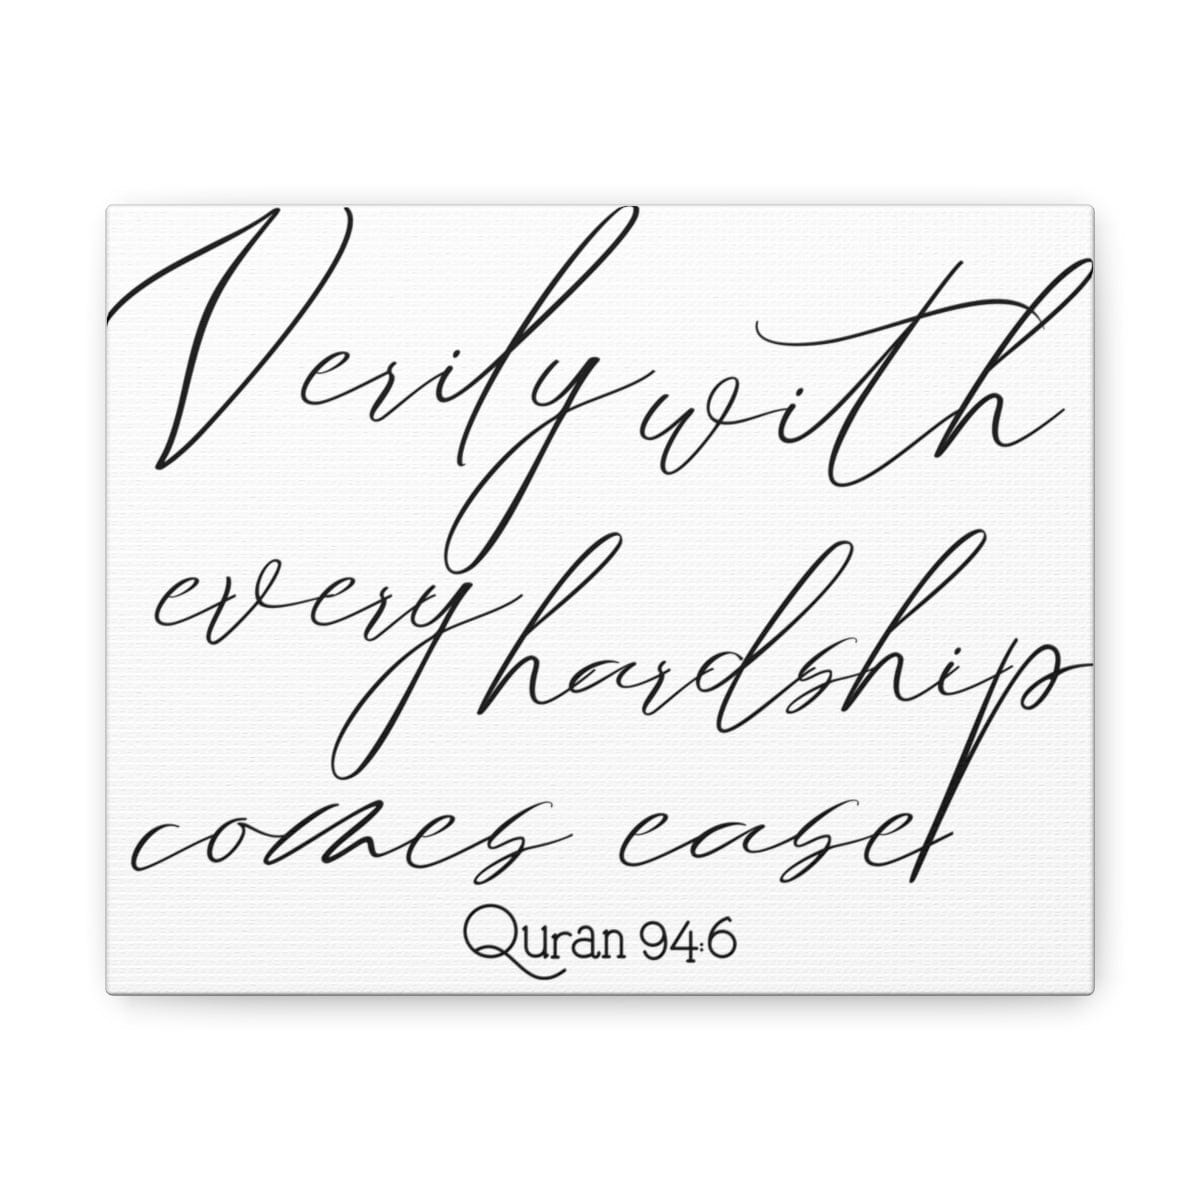 "Verily with every hardship comes ease"Canvas Gallery Wraps, Quranic Ayah canvas, Quranic reminder, Islamic wall art, Islamic decor